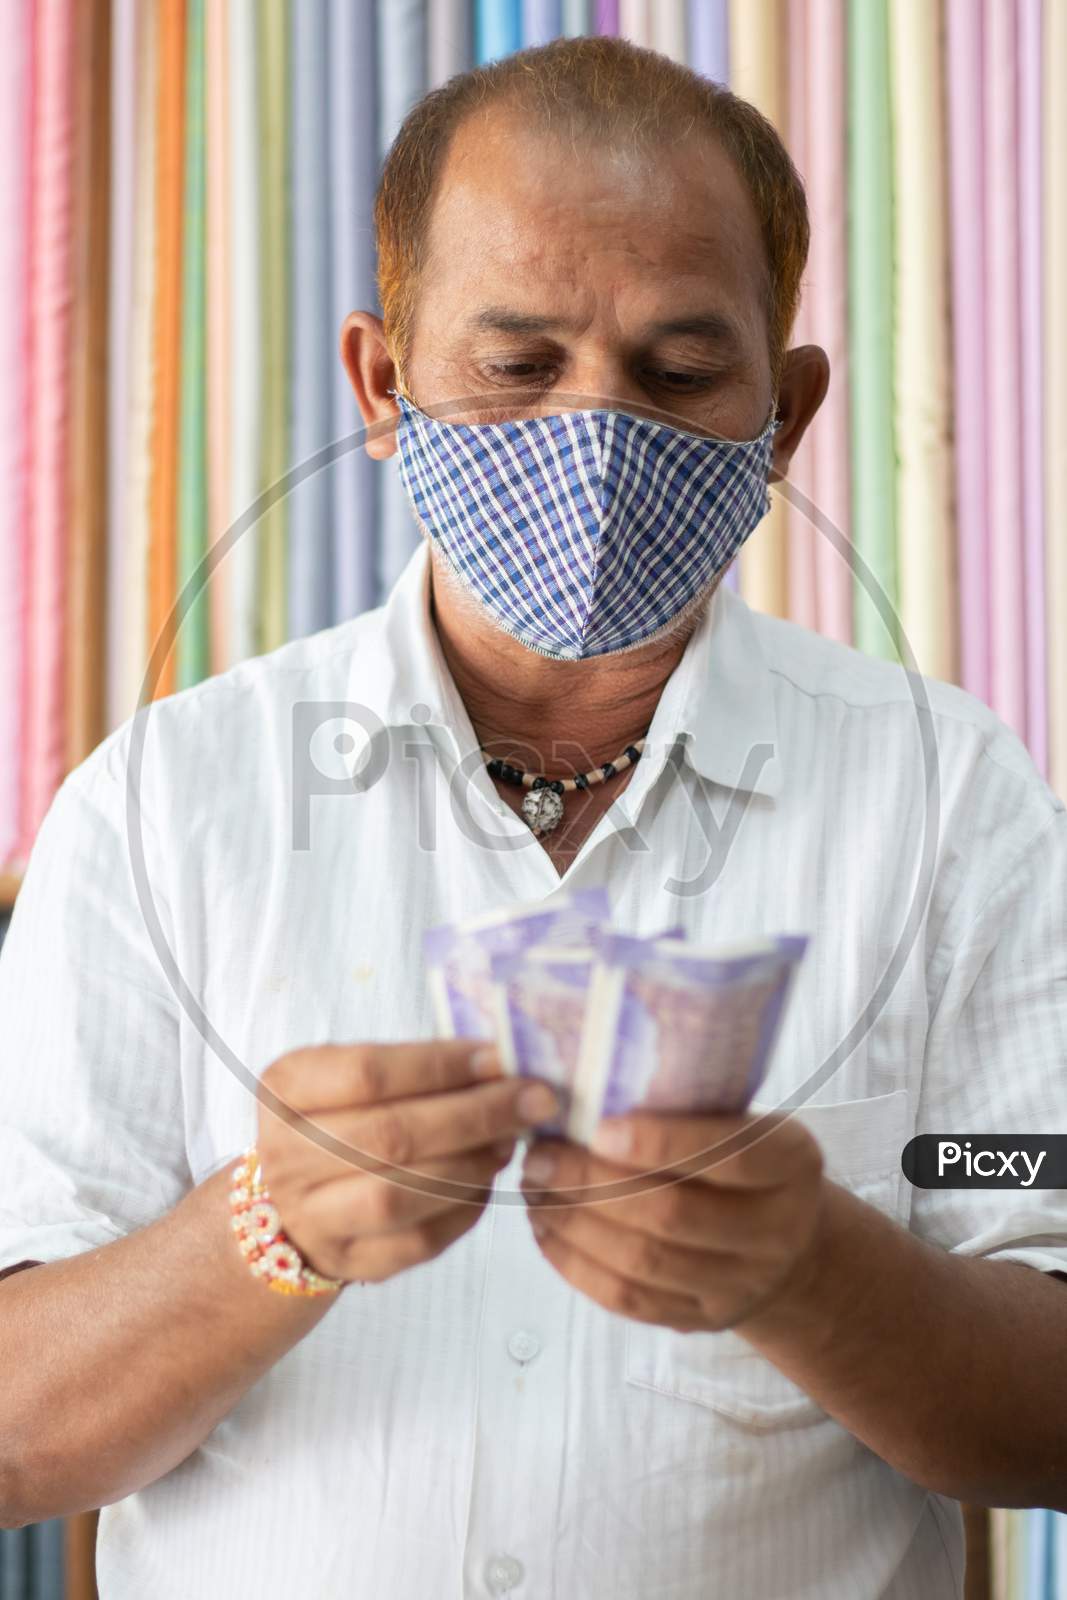 Small Business Owner In Medical Mask Counting Money At Cloth Shop During Coronavirus Or Covid-19 Crisis - Concept Of Back To Business, Making Money And Reopen Economy